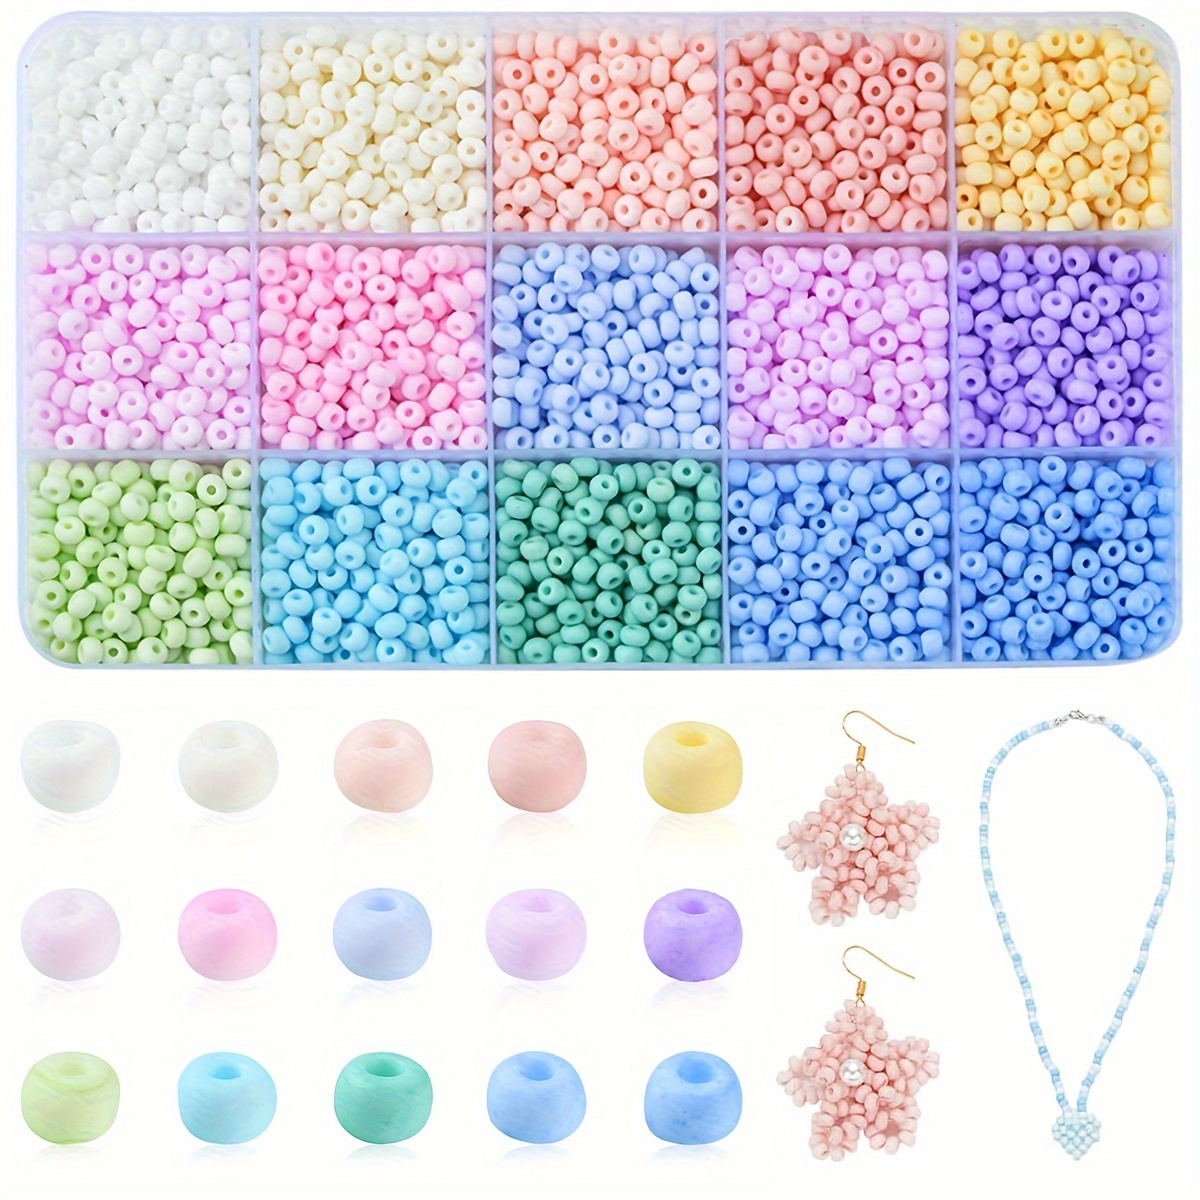 

150g/5.29oz(about1900pcs) Candy Macaron Color Seed Glass Beads 15 Colors Glass Beads Frosted Spacer Beads Tiny Glass Bead Kit For Diy Crafts Earrings Necklaces Bracelet Jewelry Making